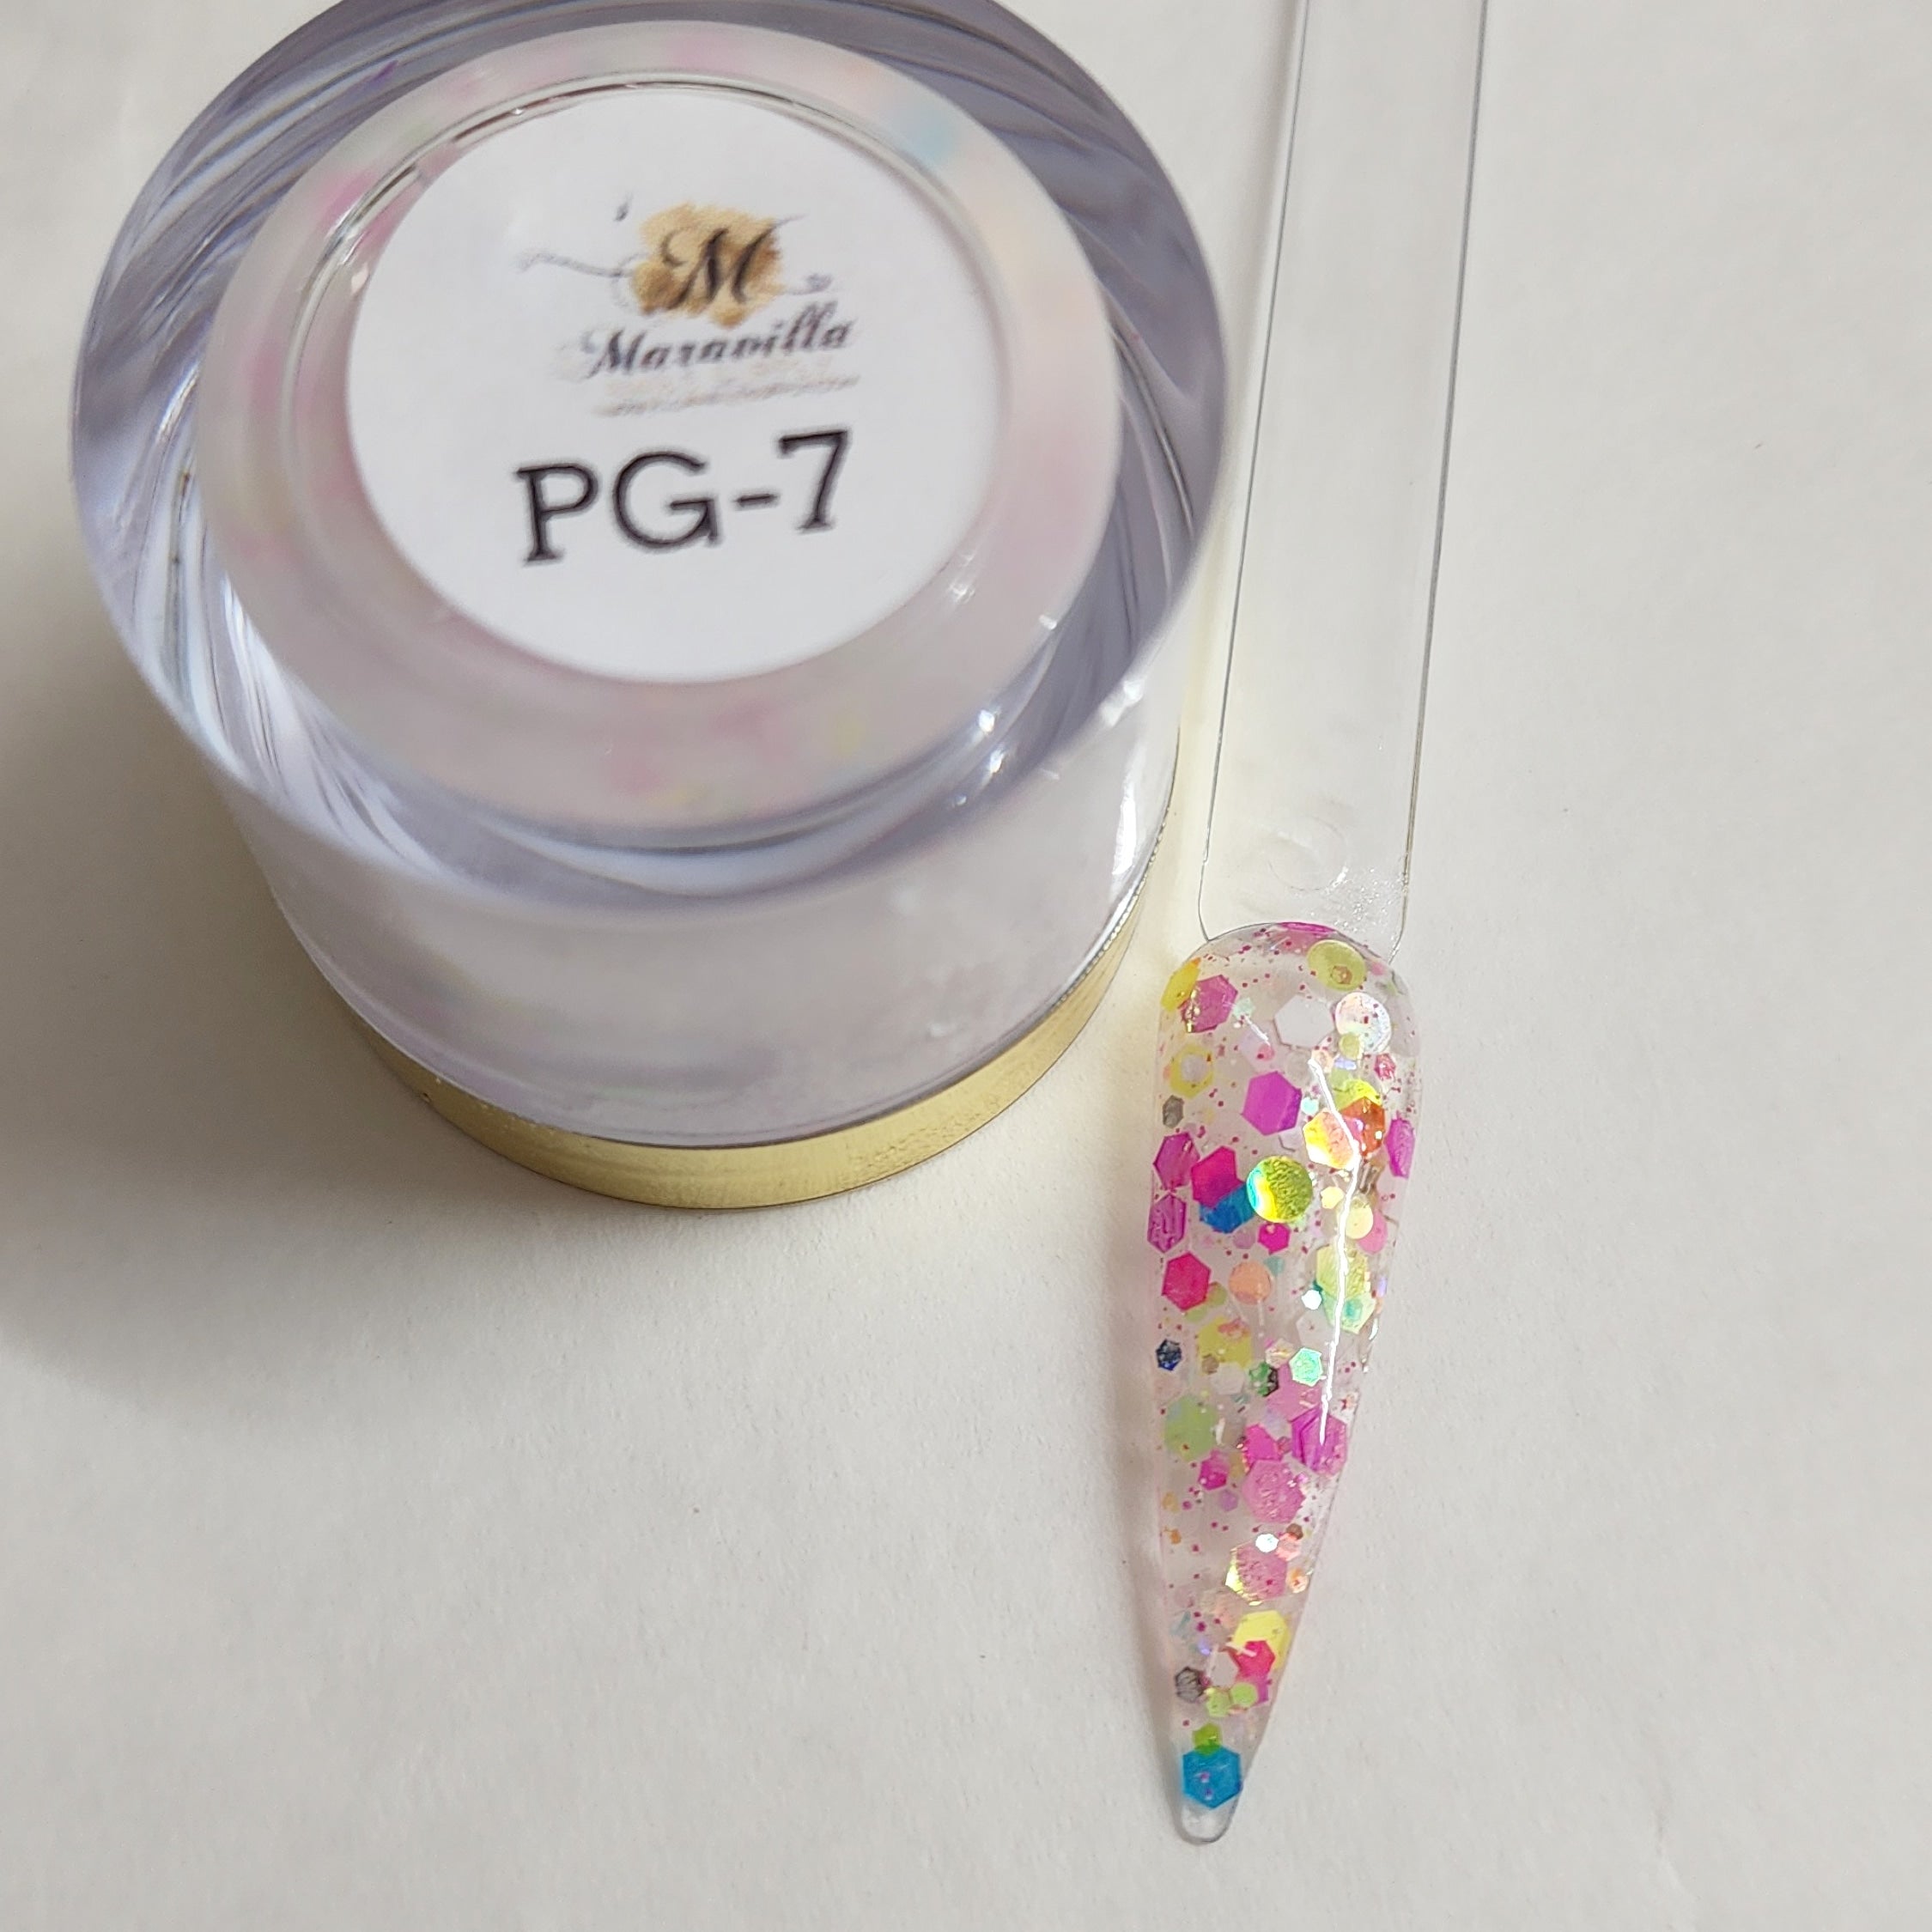 Glitter Acrylic Powder • 201 • Moon Prism Power – Tickled Pinque Cosmetics